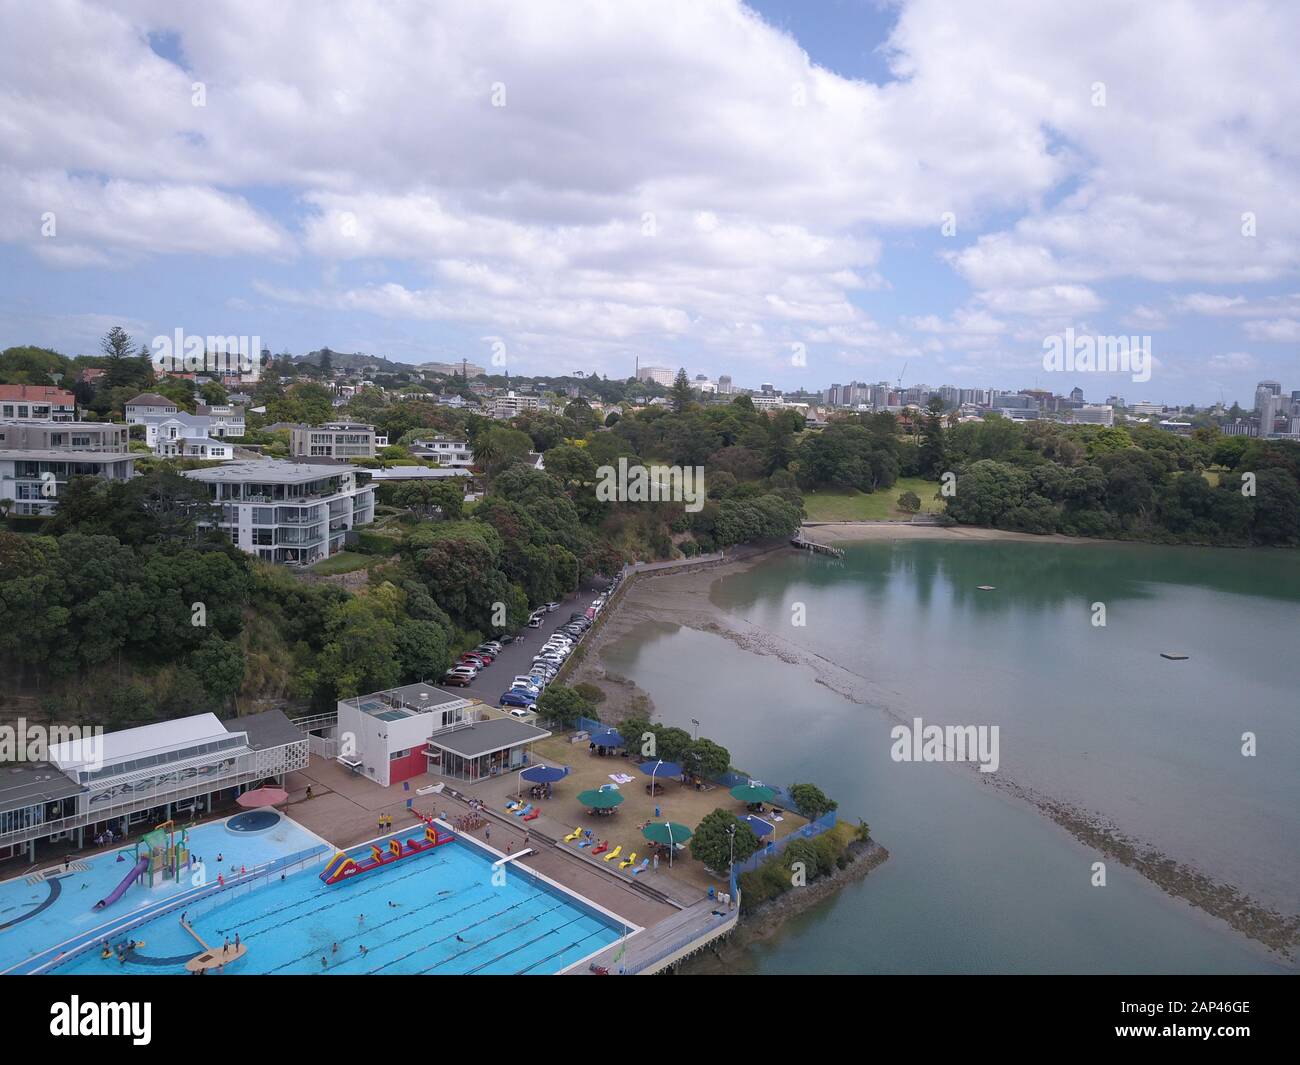 Viaduct Harbour, Auckland / New Zealand - December 29, 2019: The Judges Bay, Okahu Bay and Hobson Bay along with the marina bays and boating clubs Stock Photo